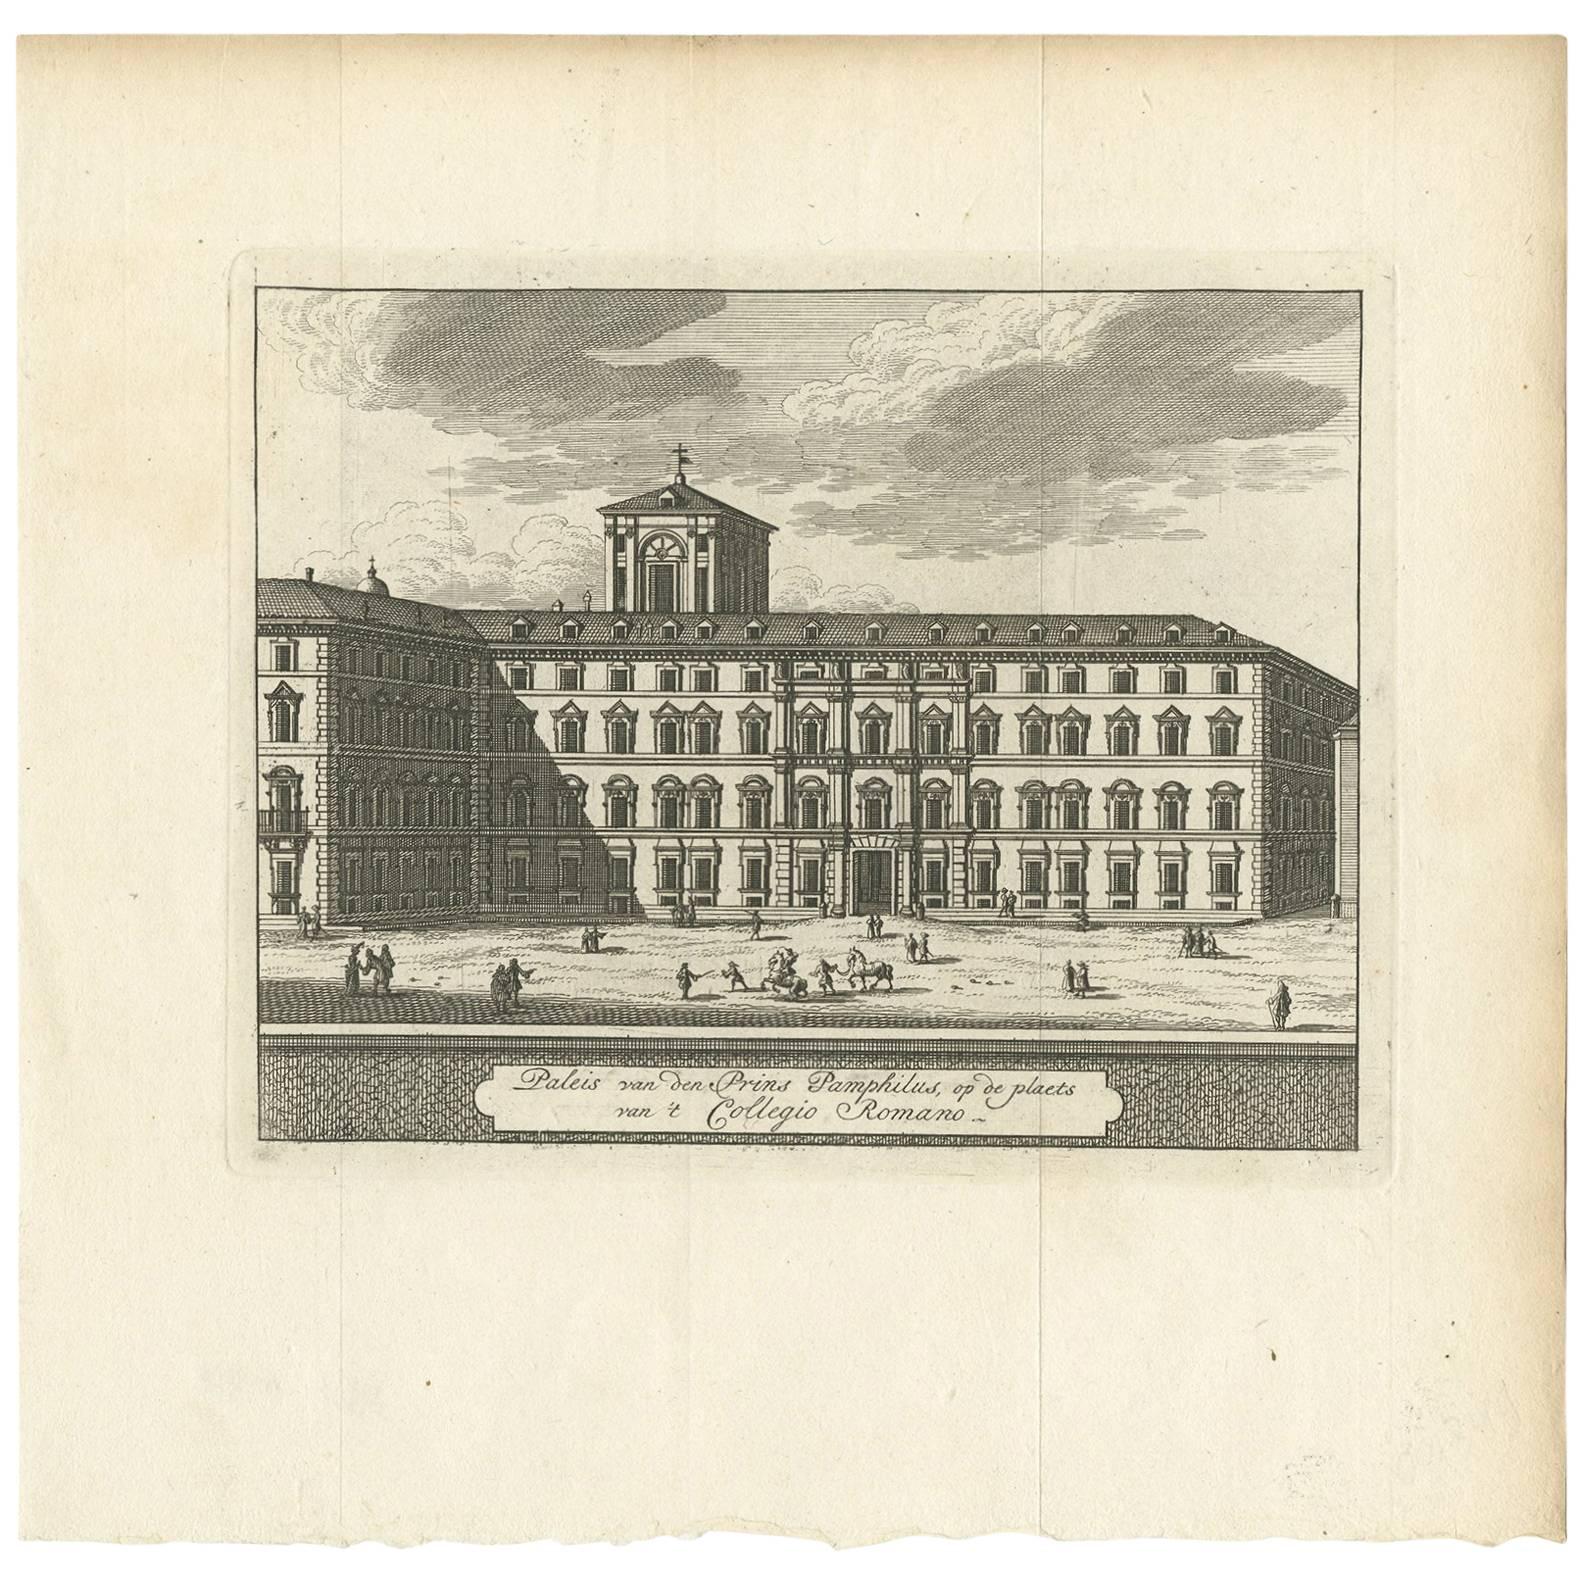 Antique Print of the Palace at Collegio Romano by M. de Bruyn, 1779